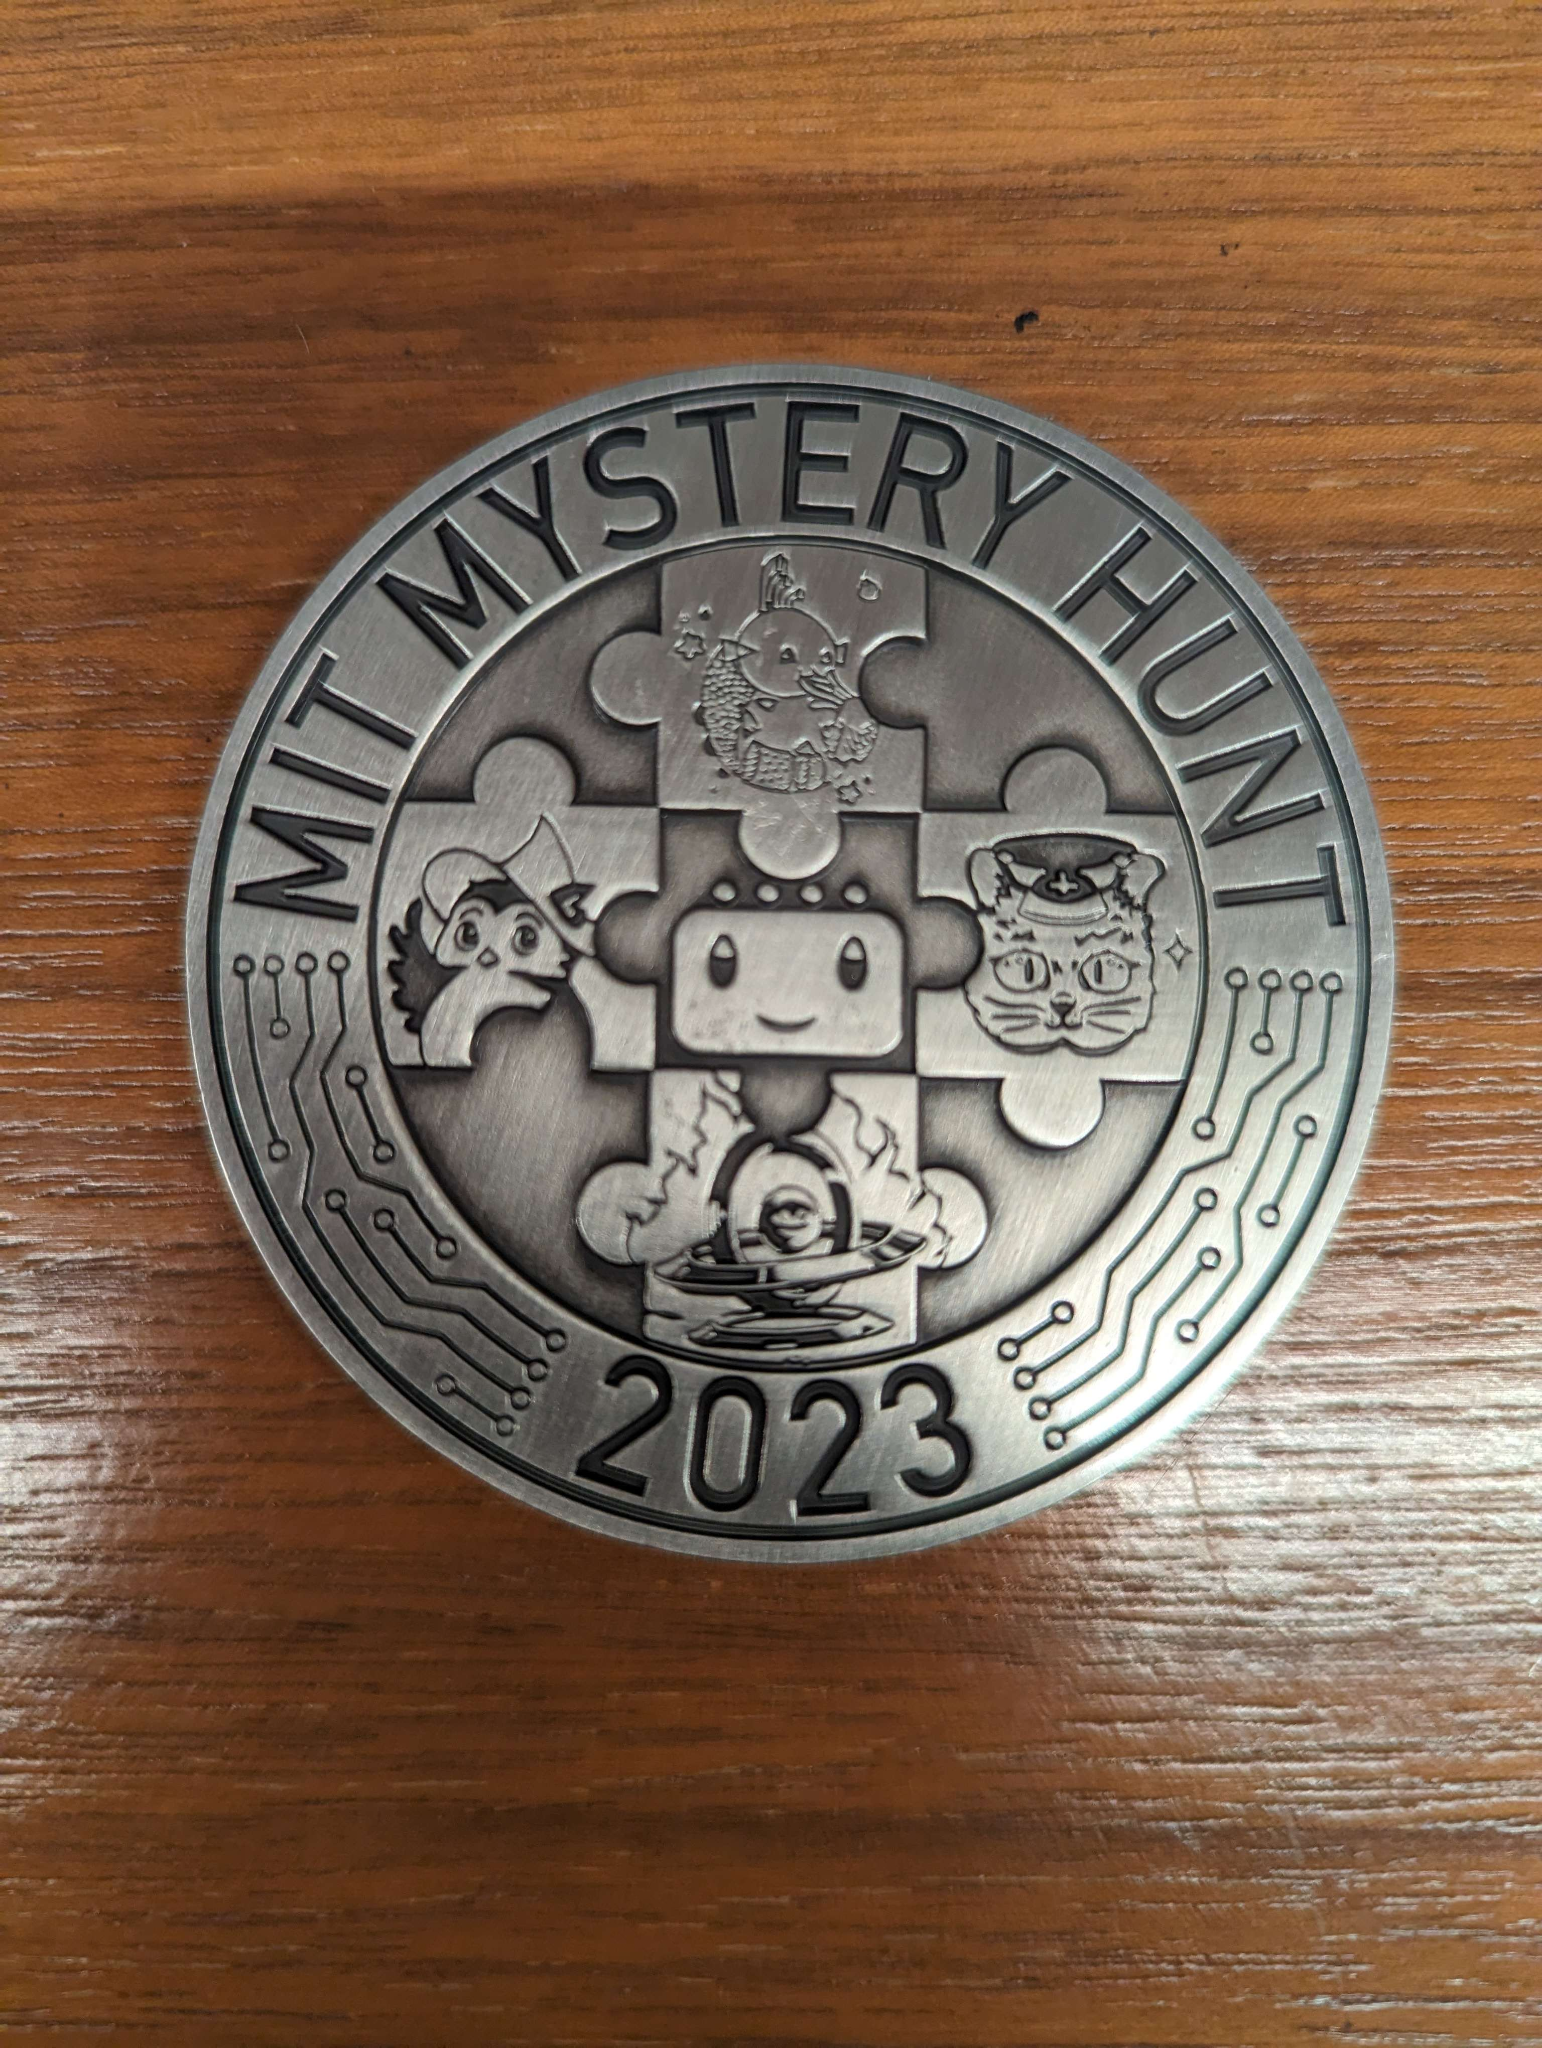 Front of the coin